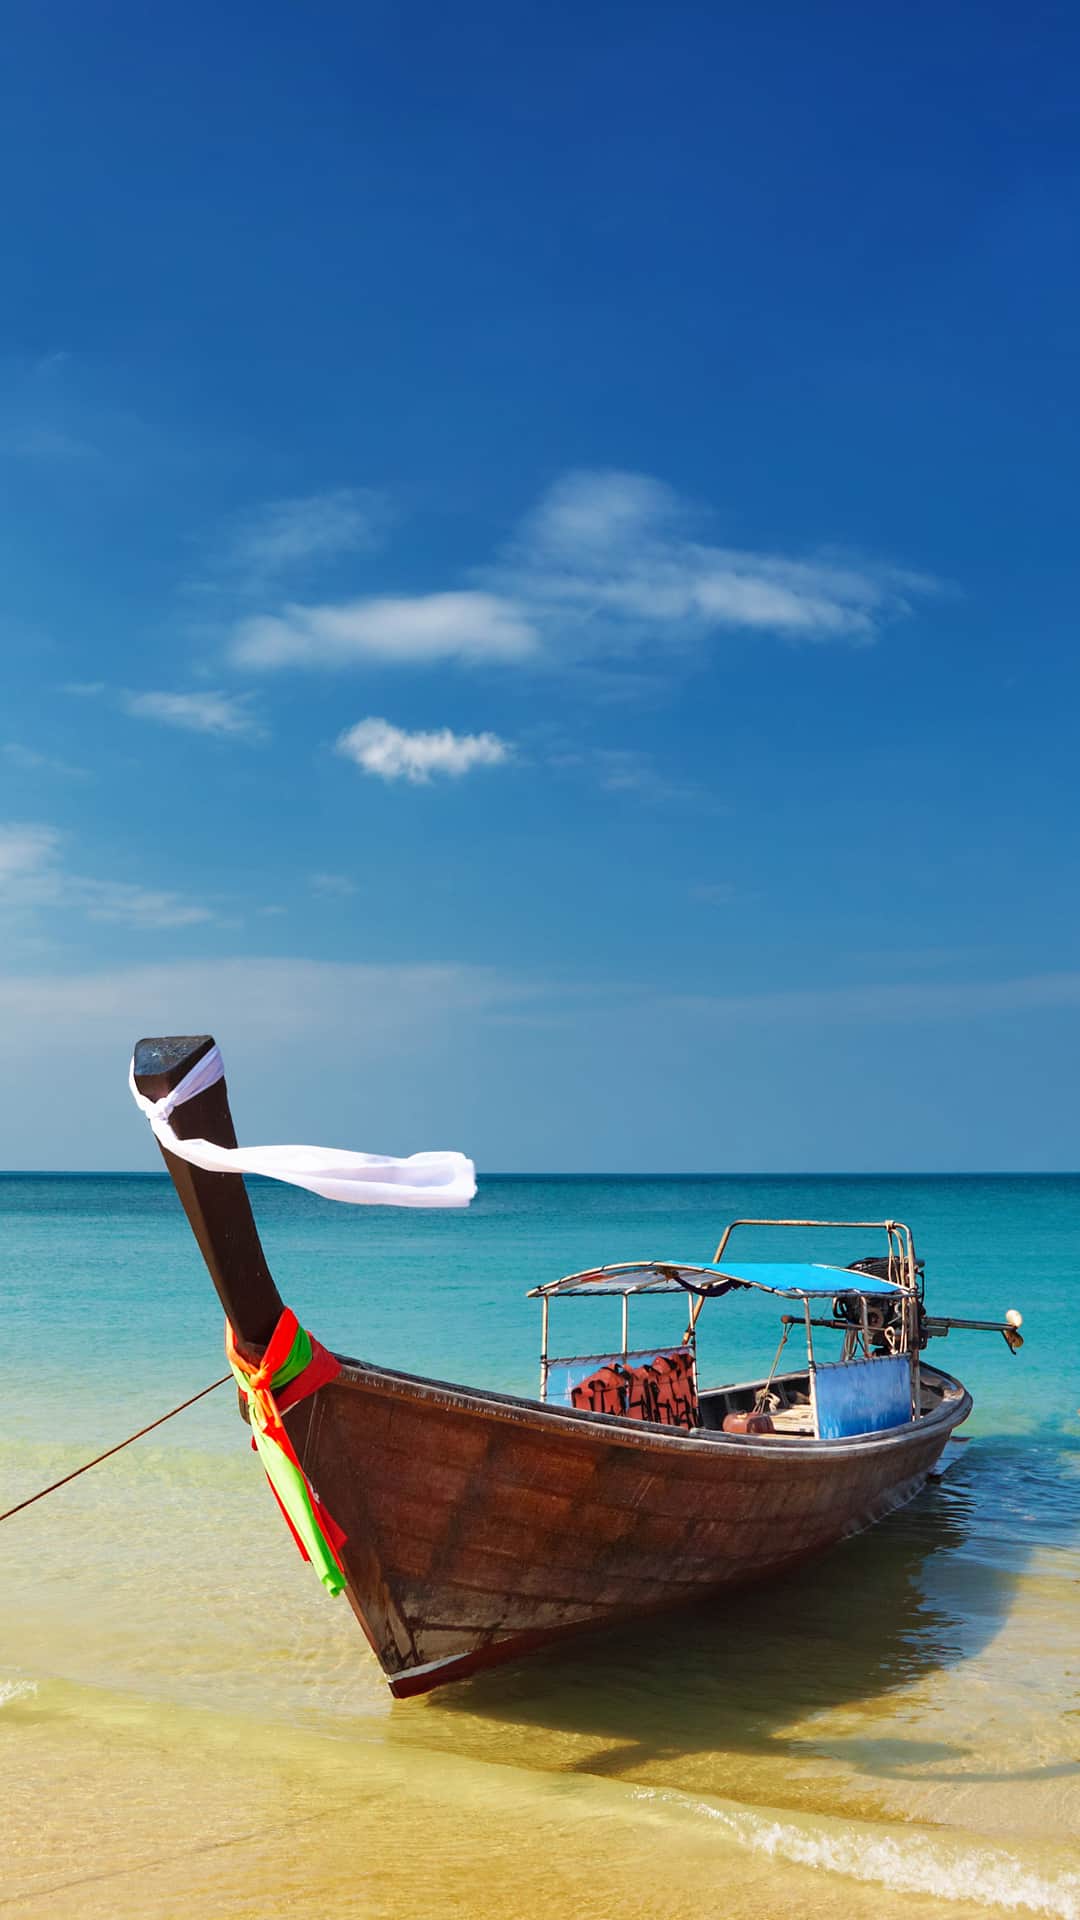 Thailand Beach Shore Boat Android Wallpaper